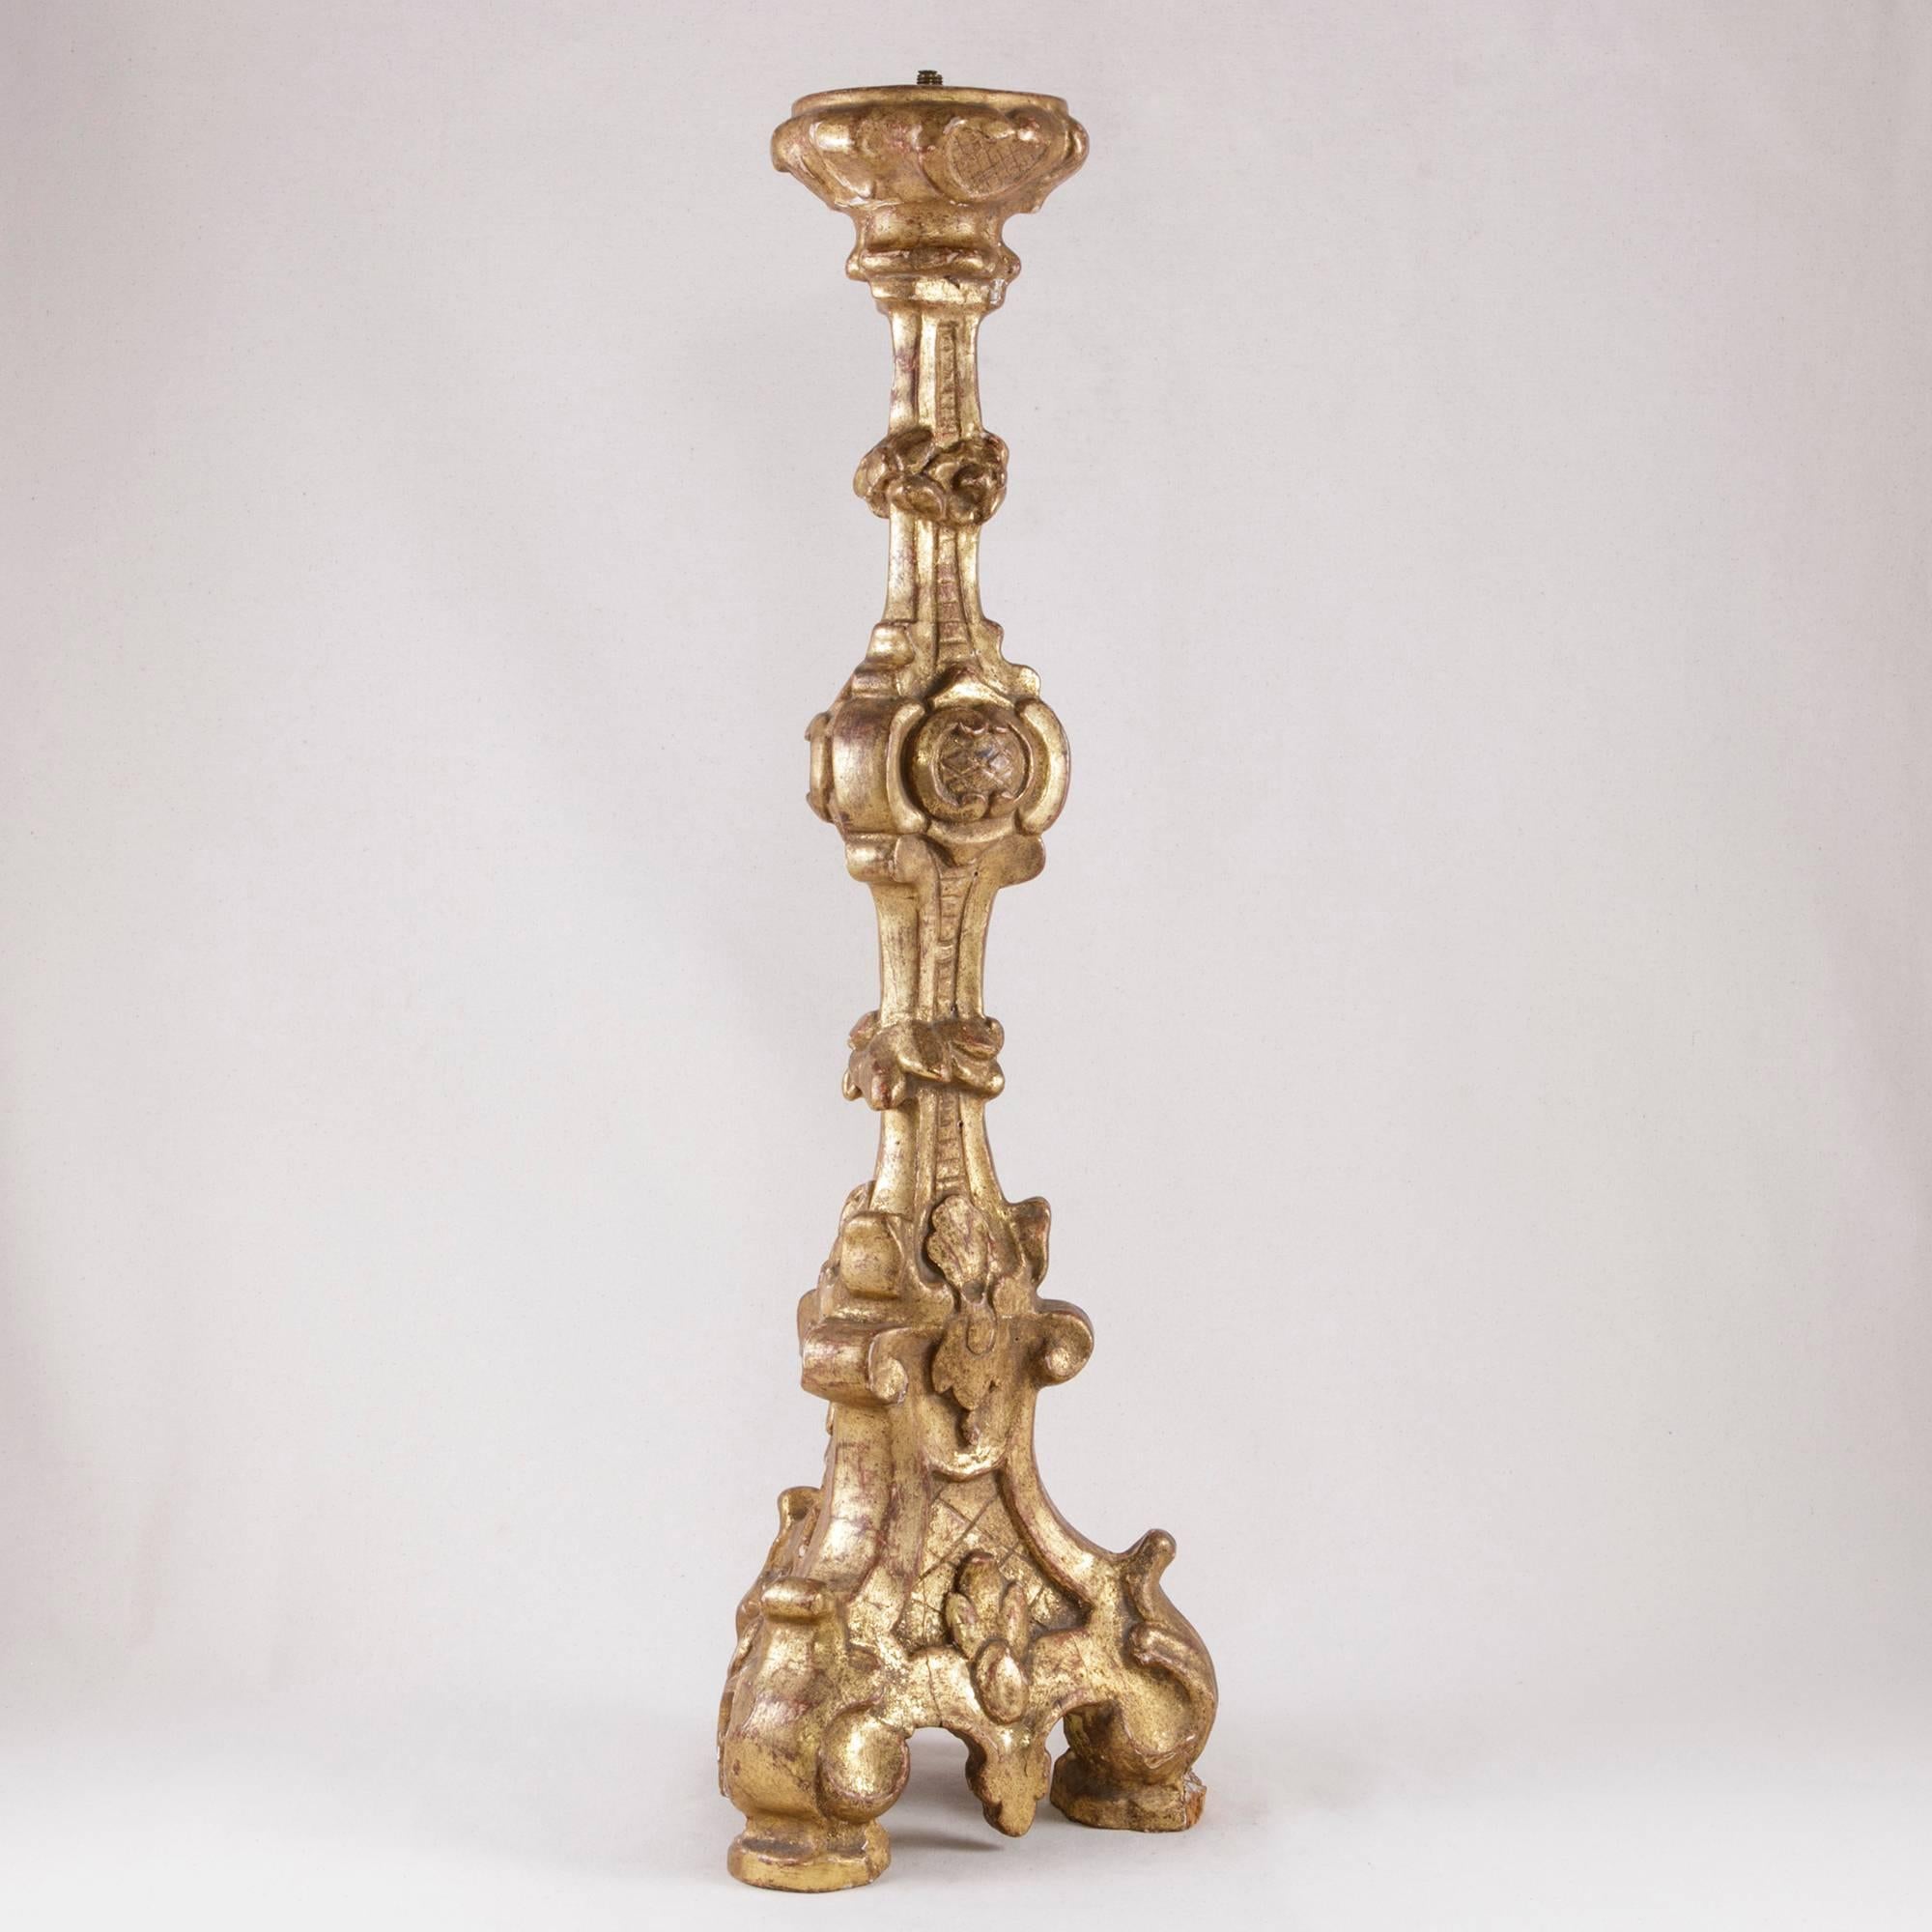 From Piedmont, Italy, this eighteenth century hand-carved giltwood pic-cierge or pricket was originally used in a chapel. This piece features a foliage baluster stem on a tripod base. This candlestick can hold a 3-inch diameter candle. An authentic